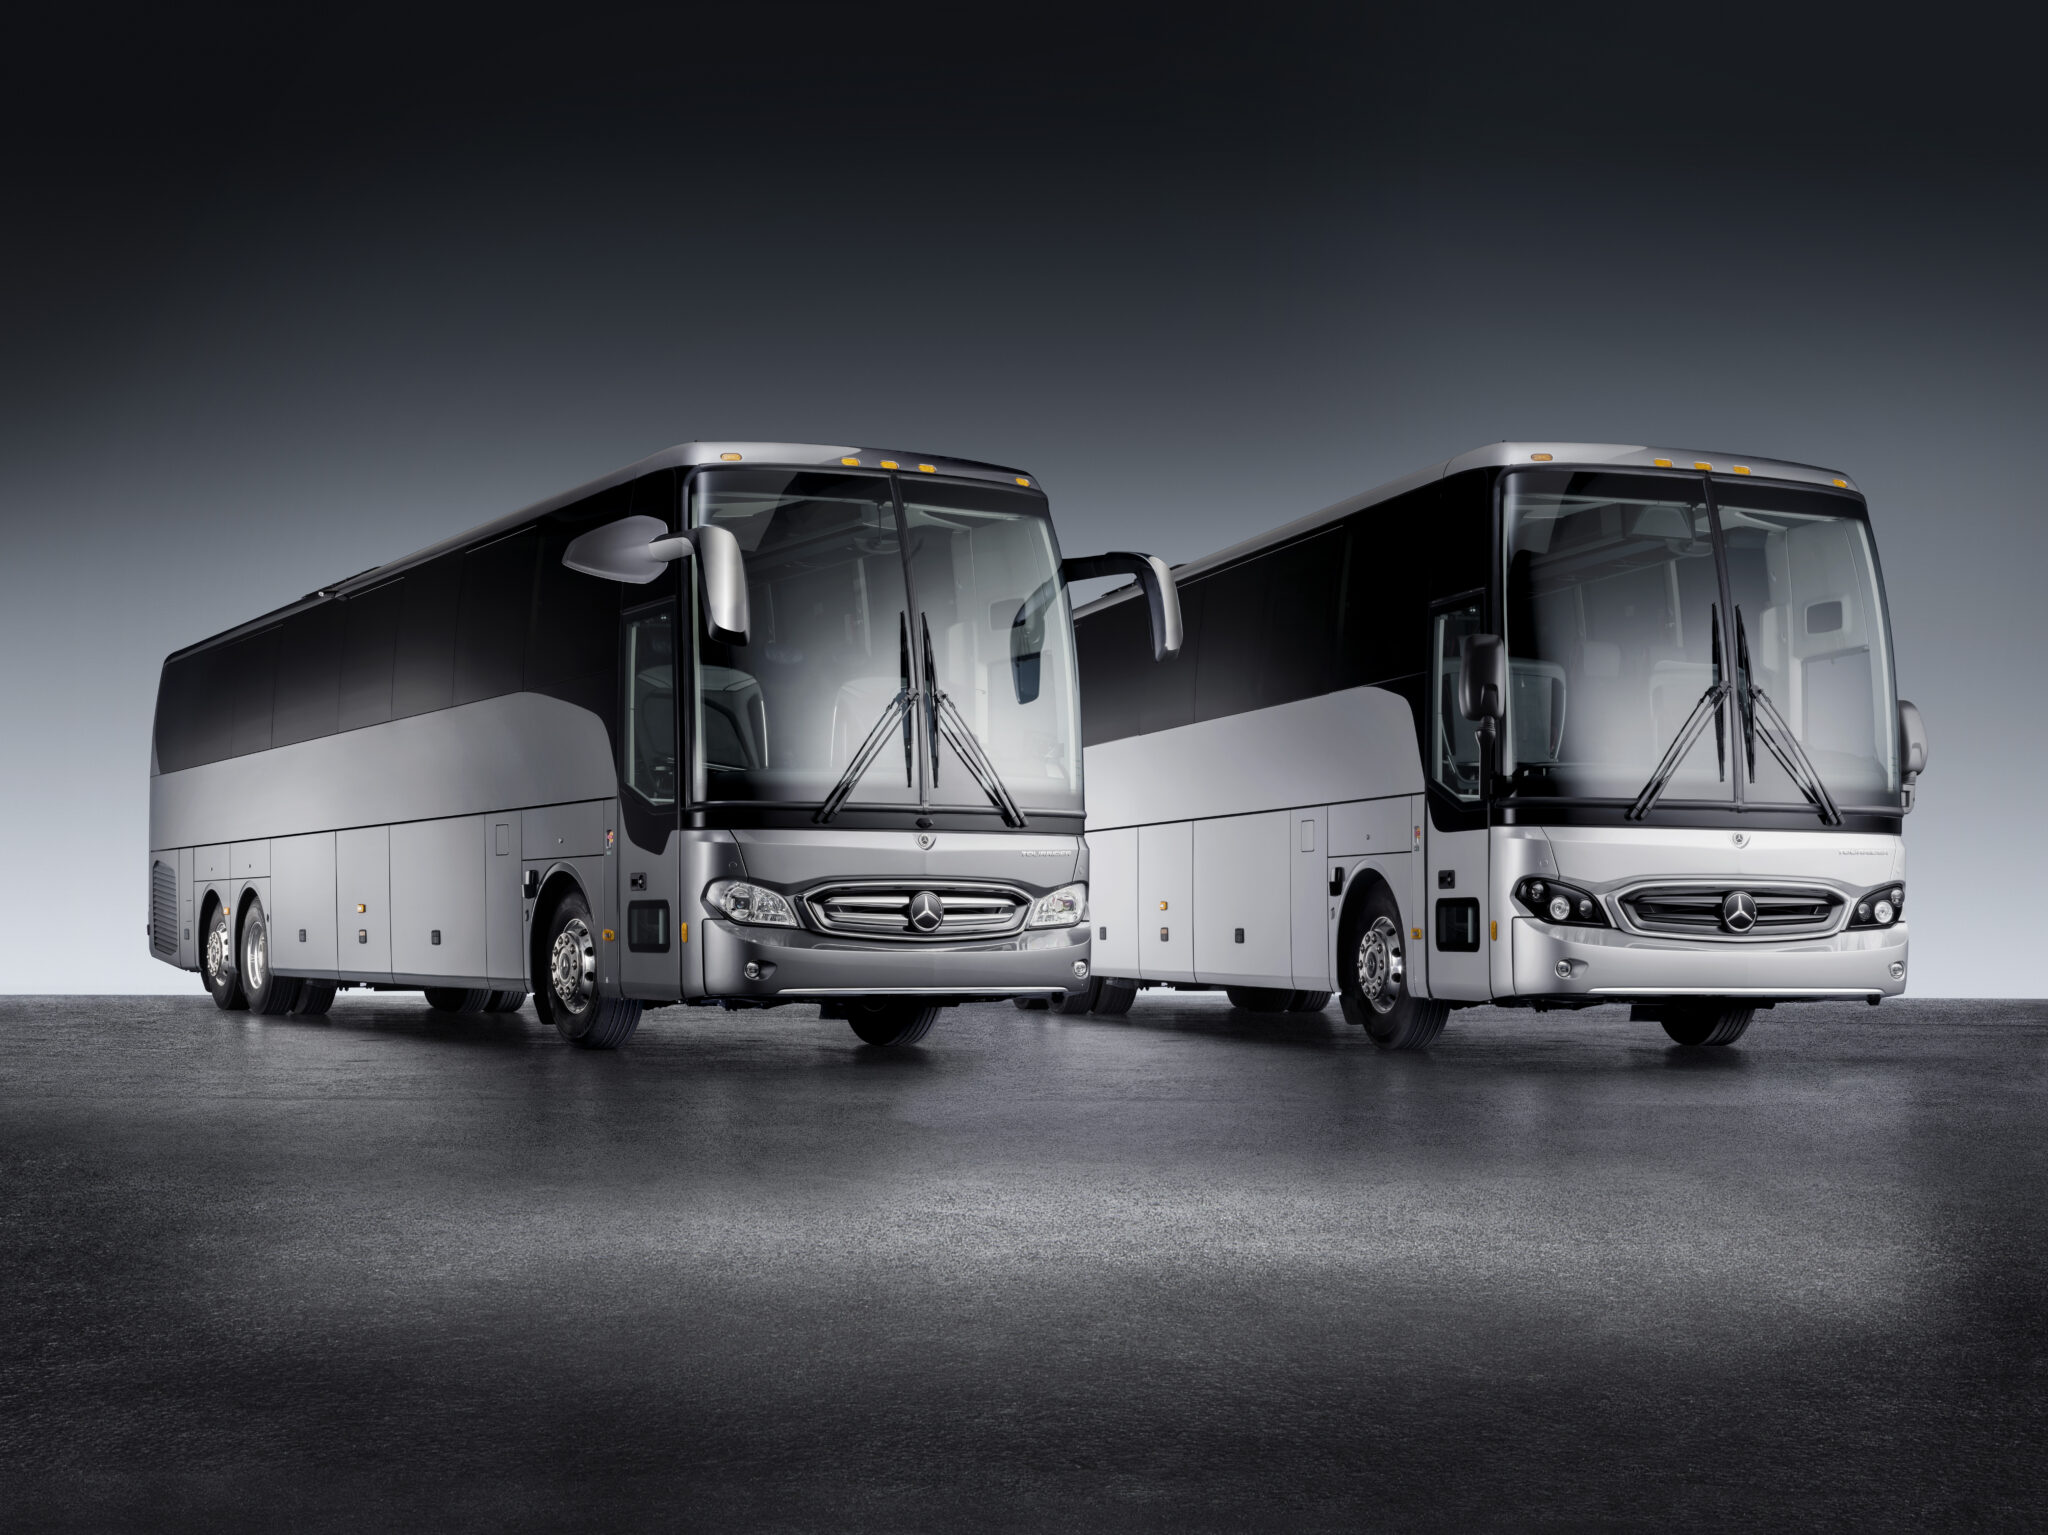 The New Tourrider A Mercedes Benz Motorcoach For North America